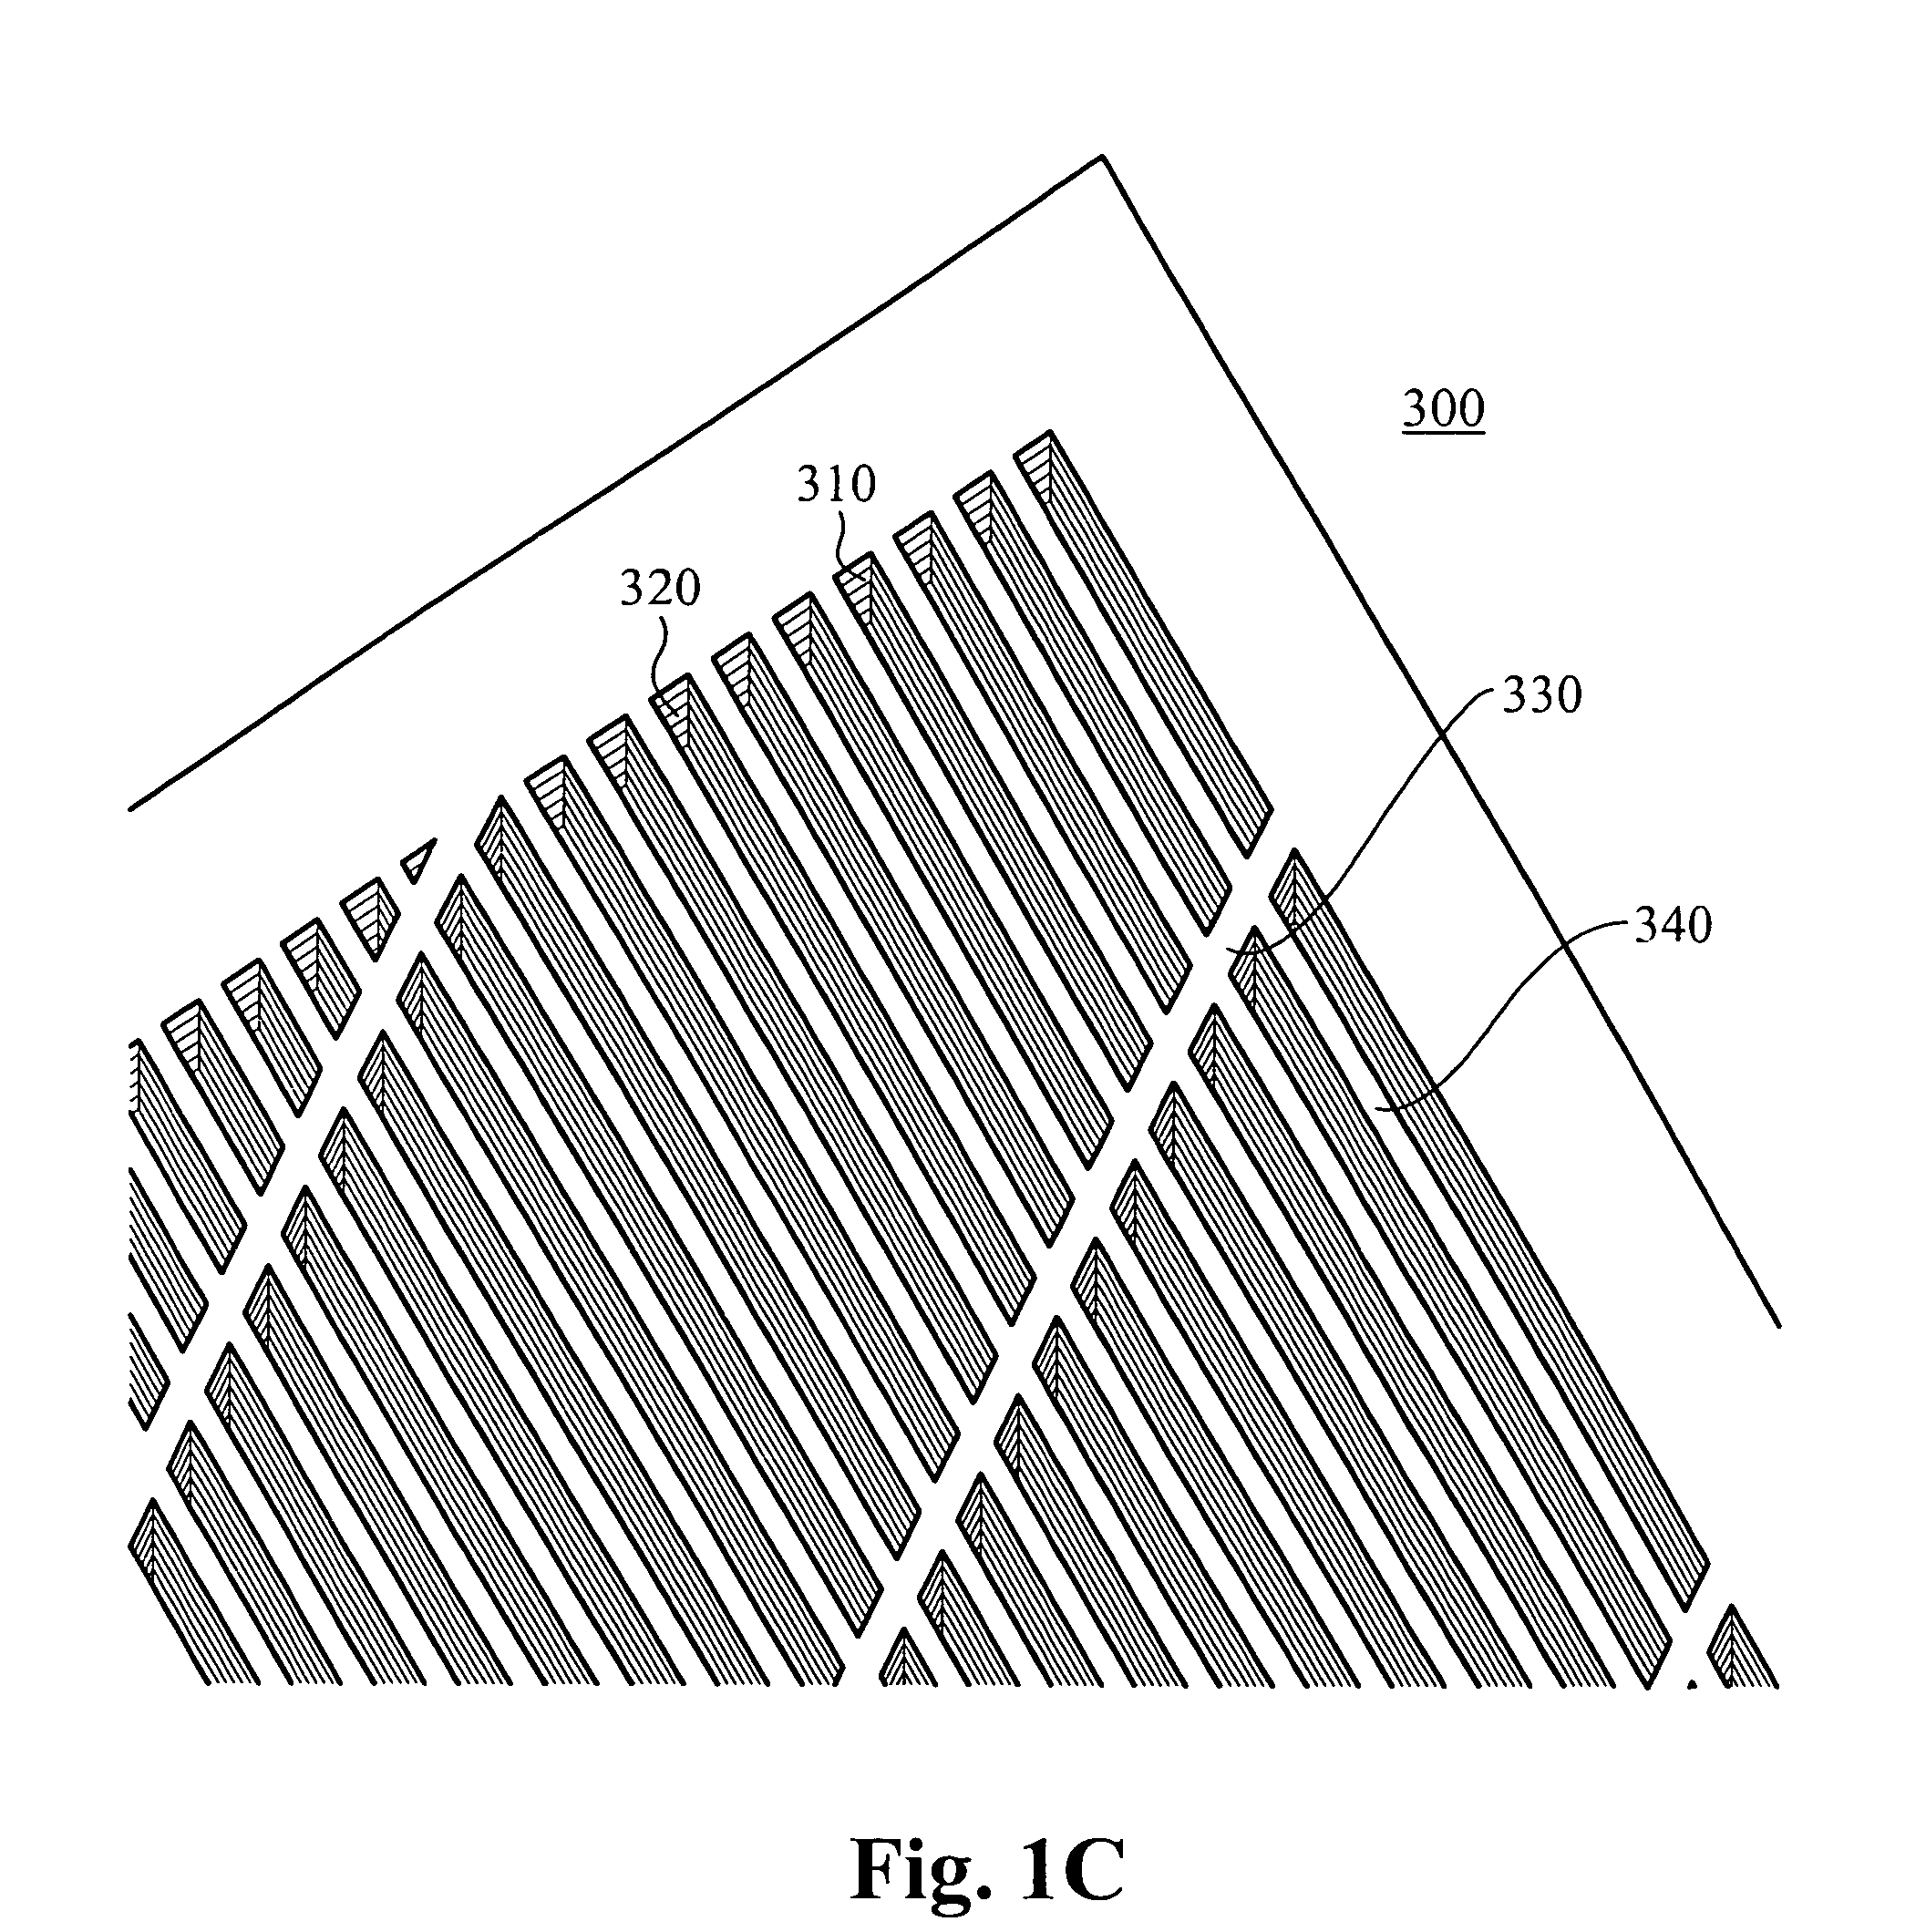 Method of fabricating high surface to volume ratio structures and their integration in microheat exchangers for liquid cooling system